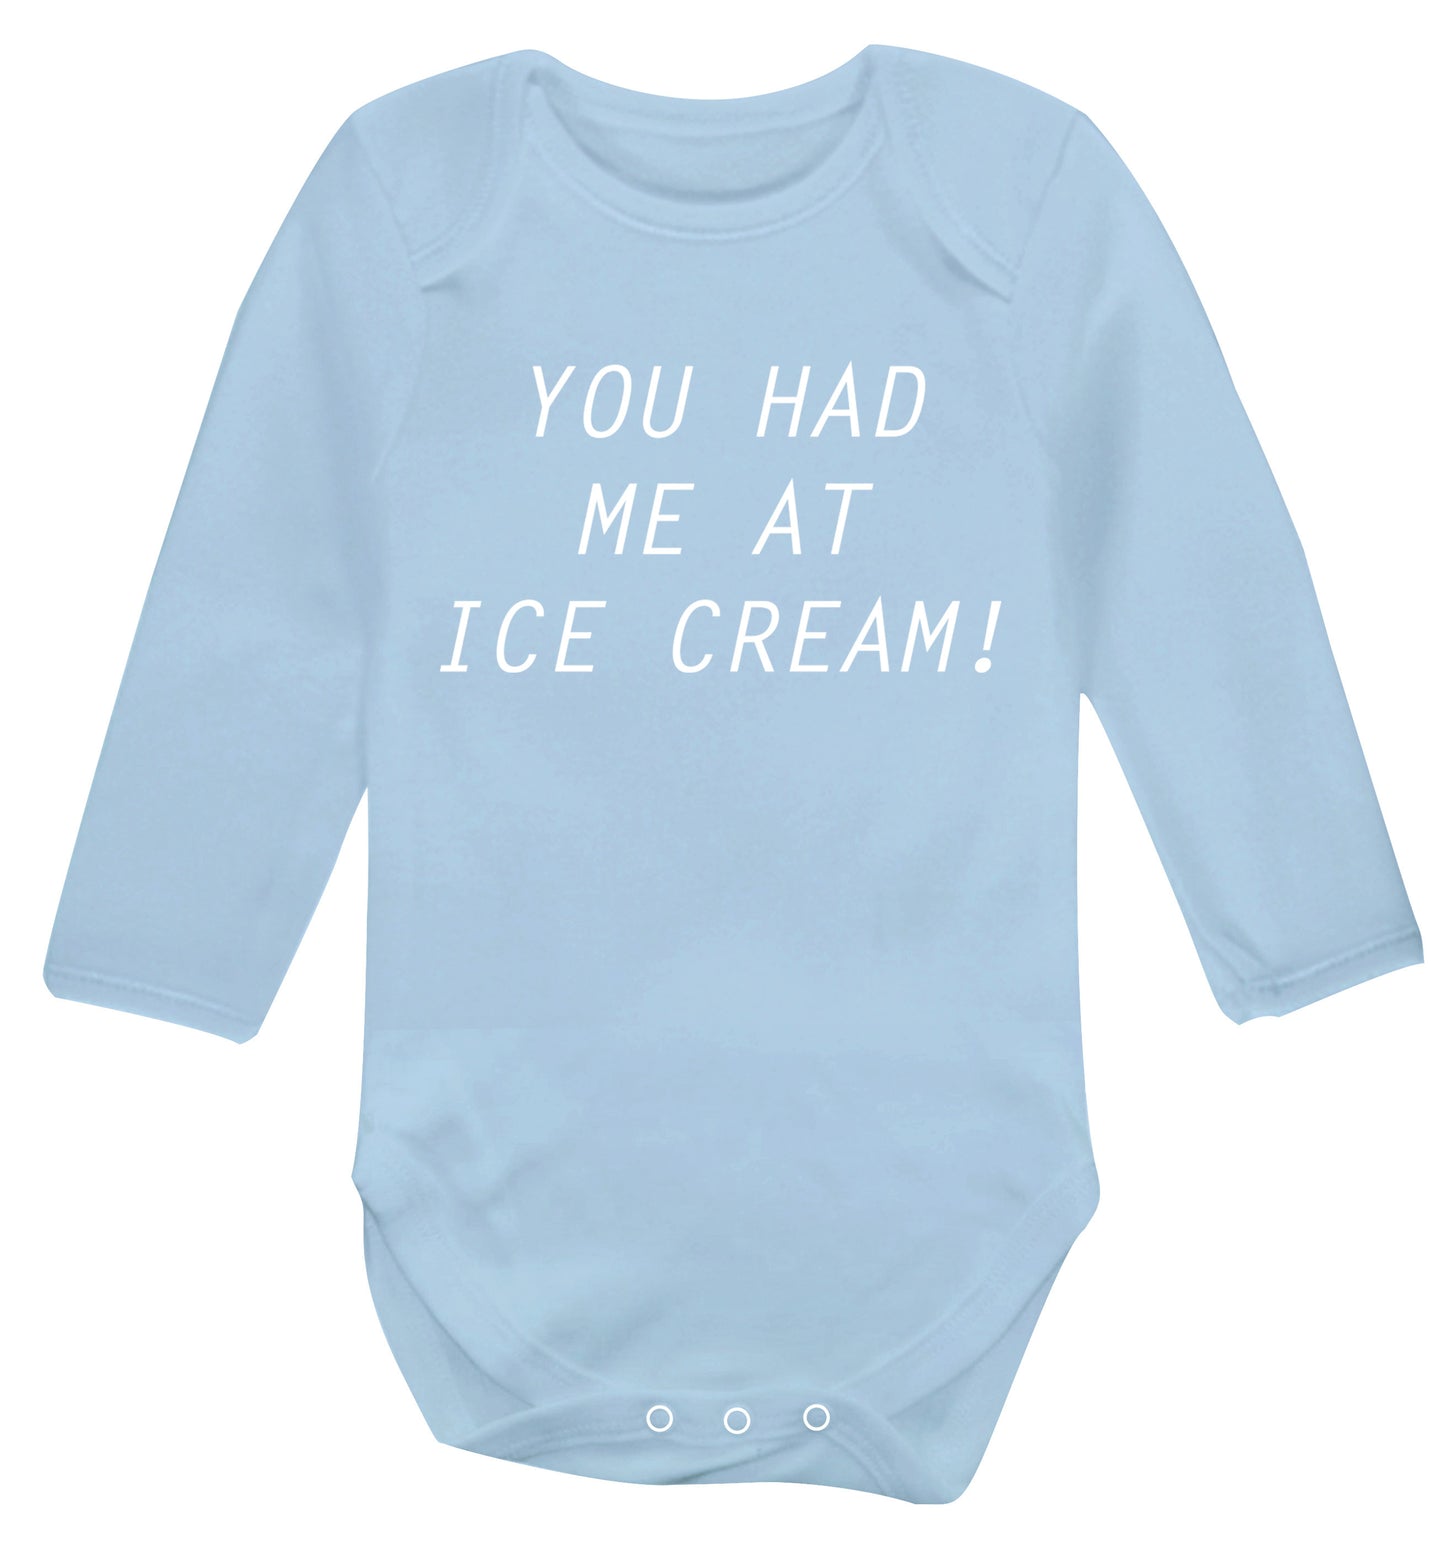 You had me at ice cream Baby Vest long sleeved pale blue 6-12 months